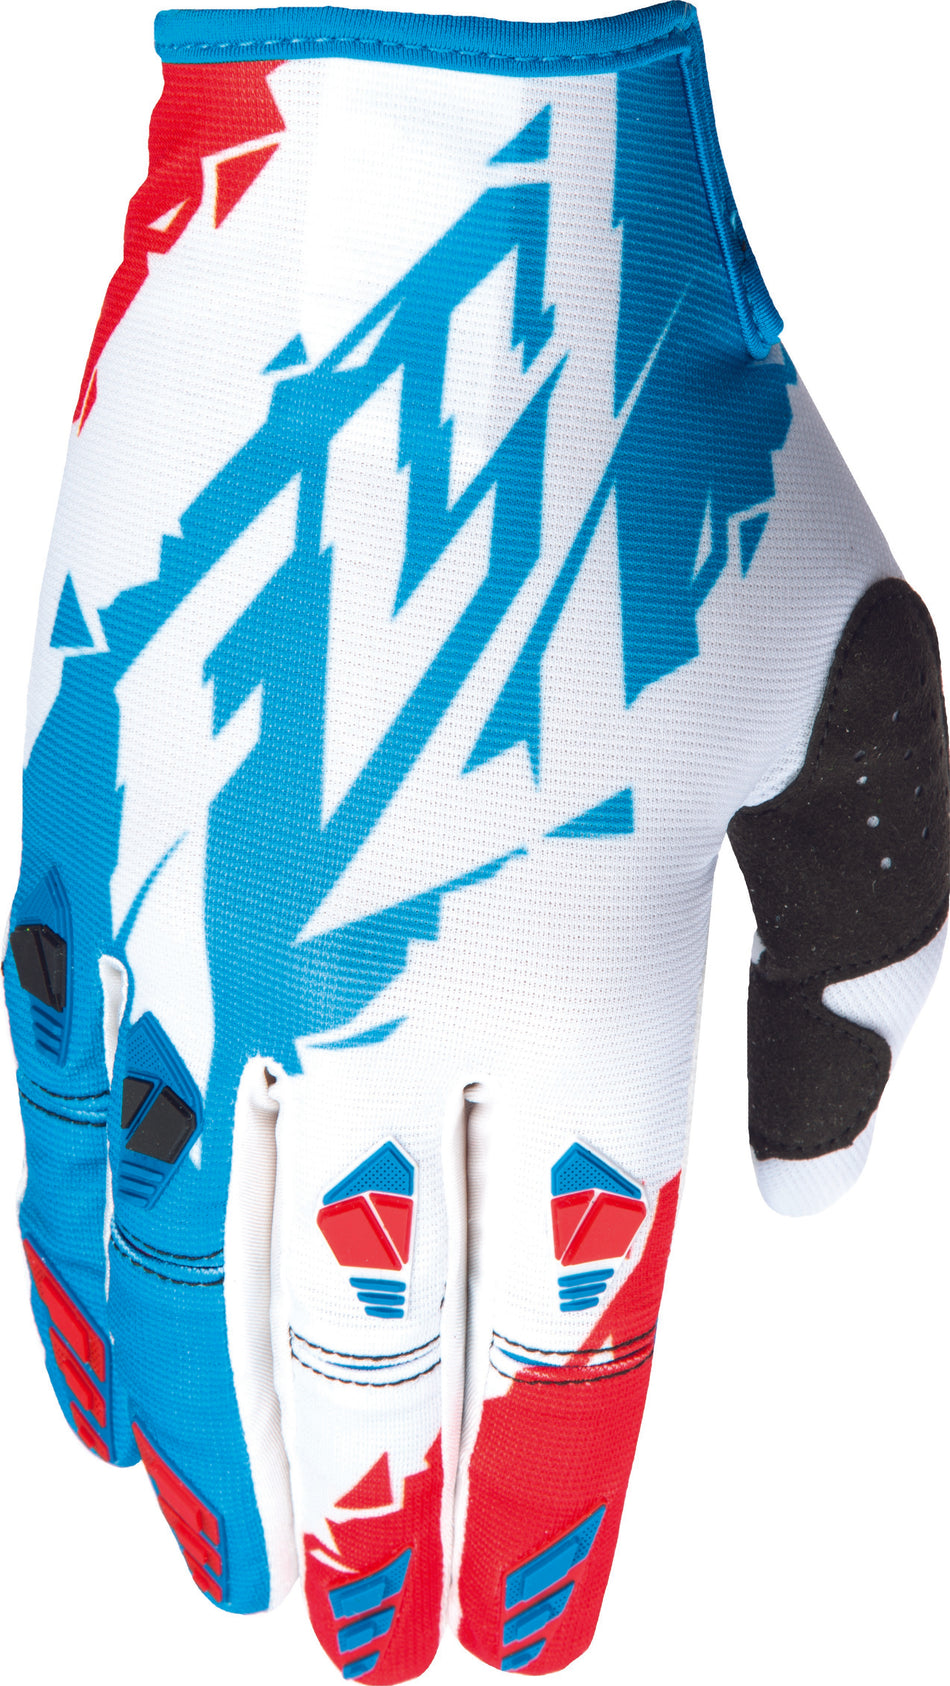 FLY RACING Kinetic Glove Red/White/Blue Sz 7 Xs 370-41107